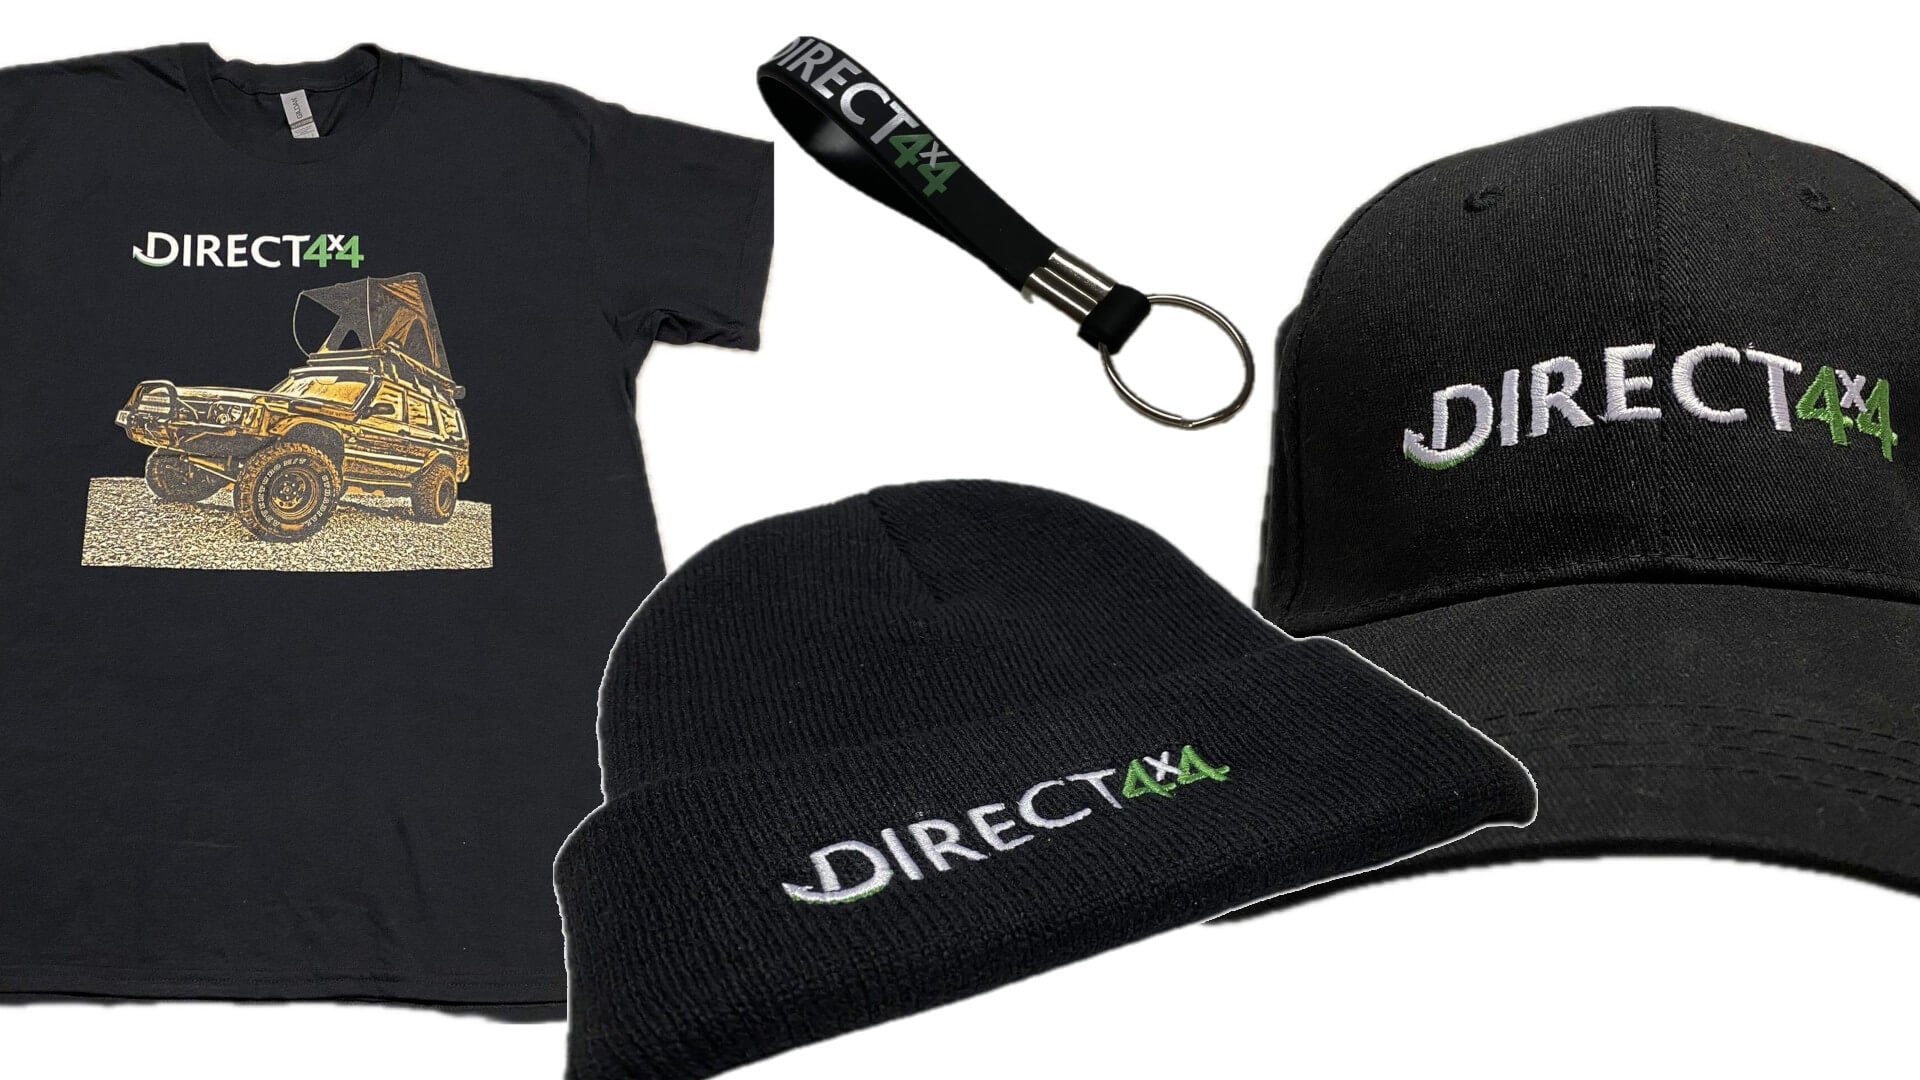 Photos of some Direct4x4 merchandise such as a black beanie hat, a keyring, a baseball cap and a t-shirt, all with the Direct4x4 logo printed on.